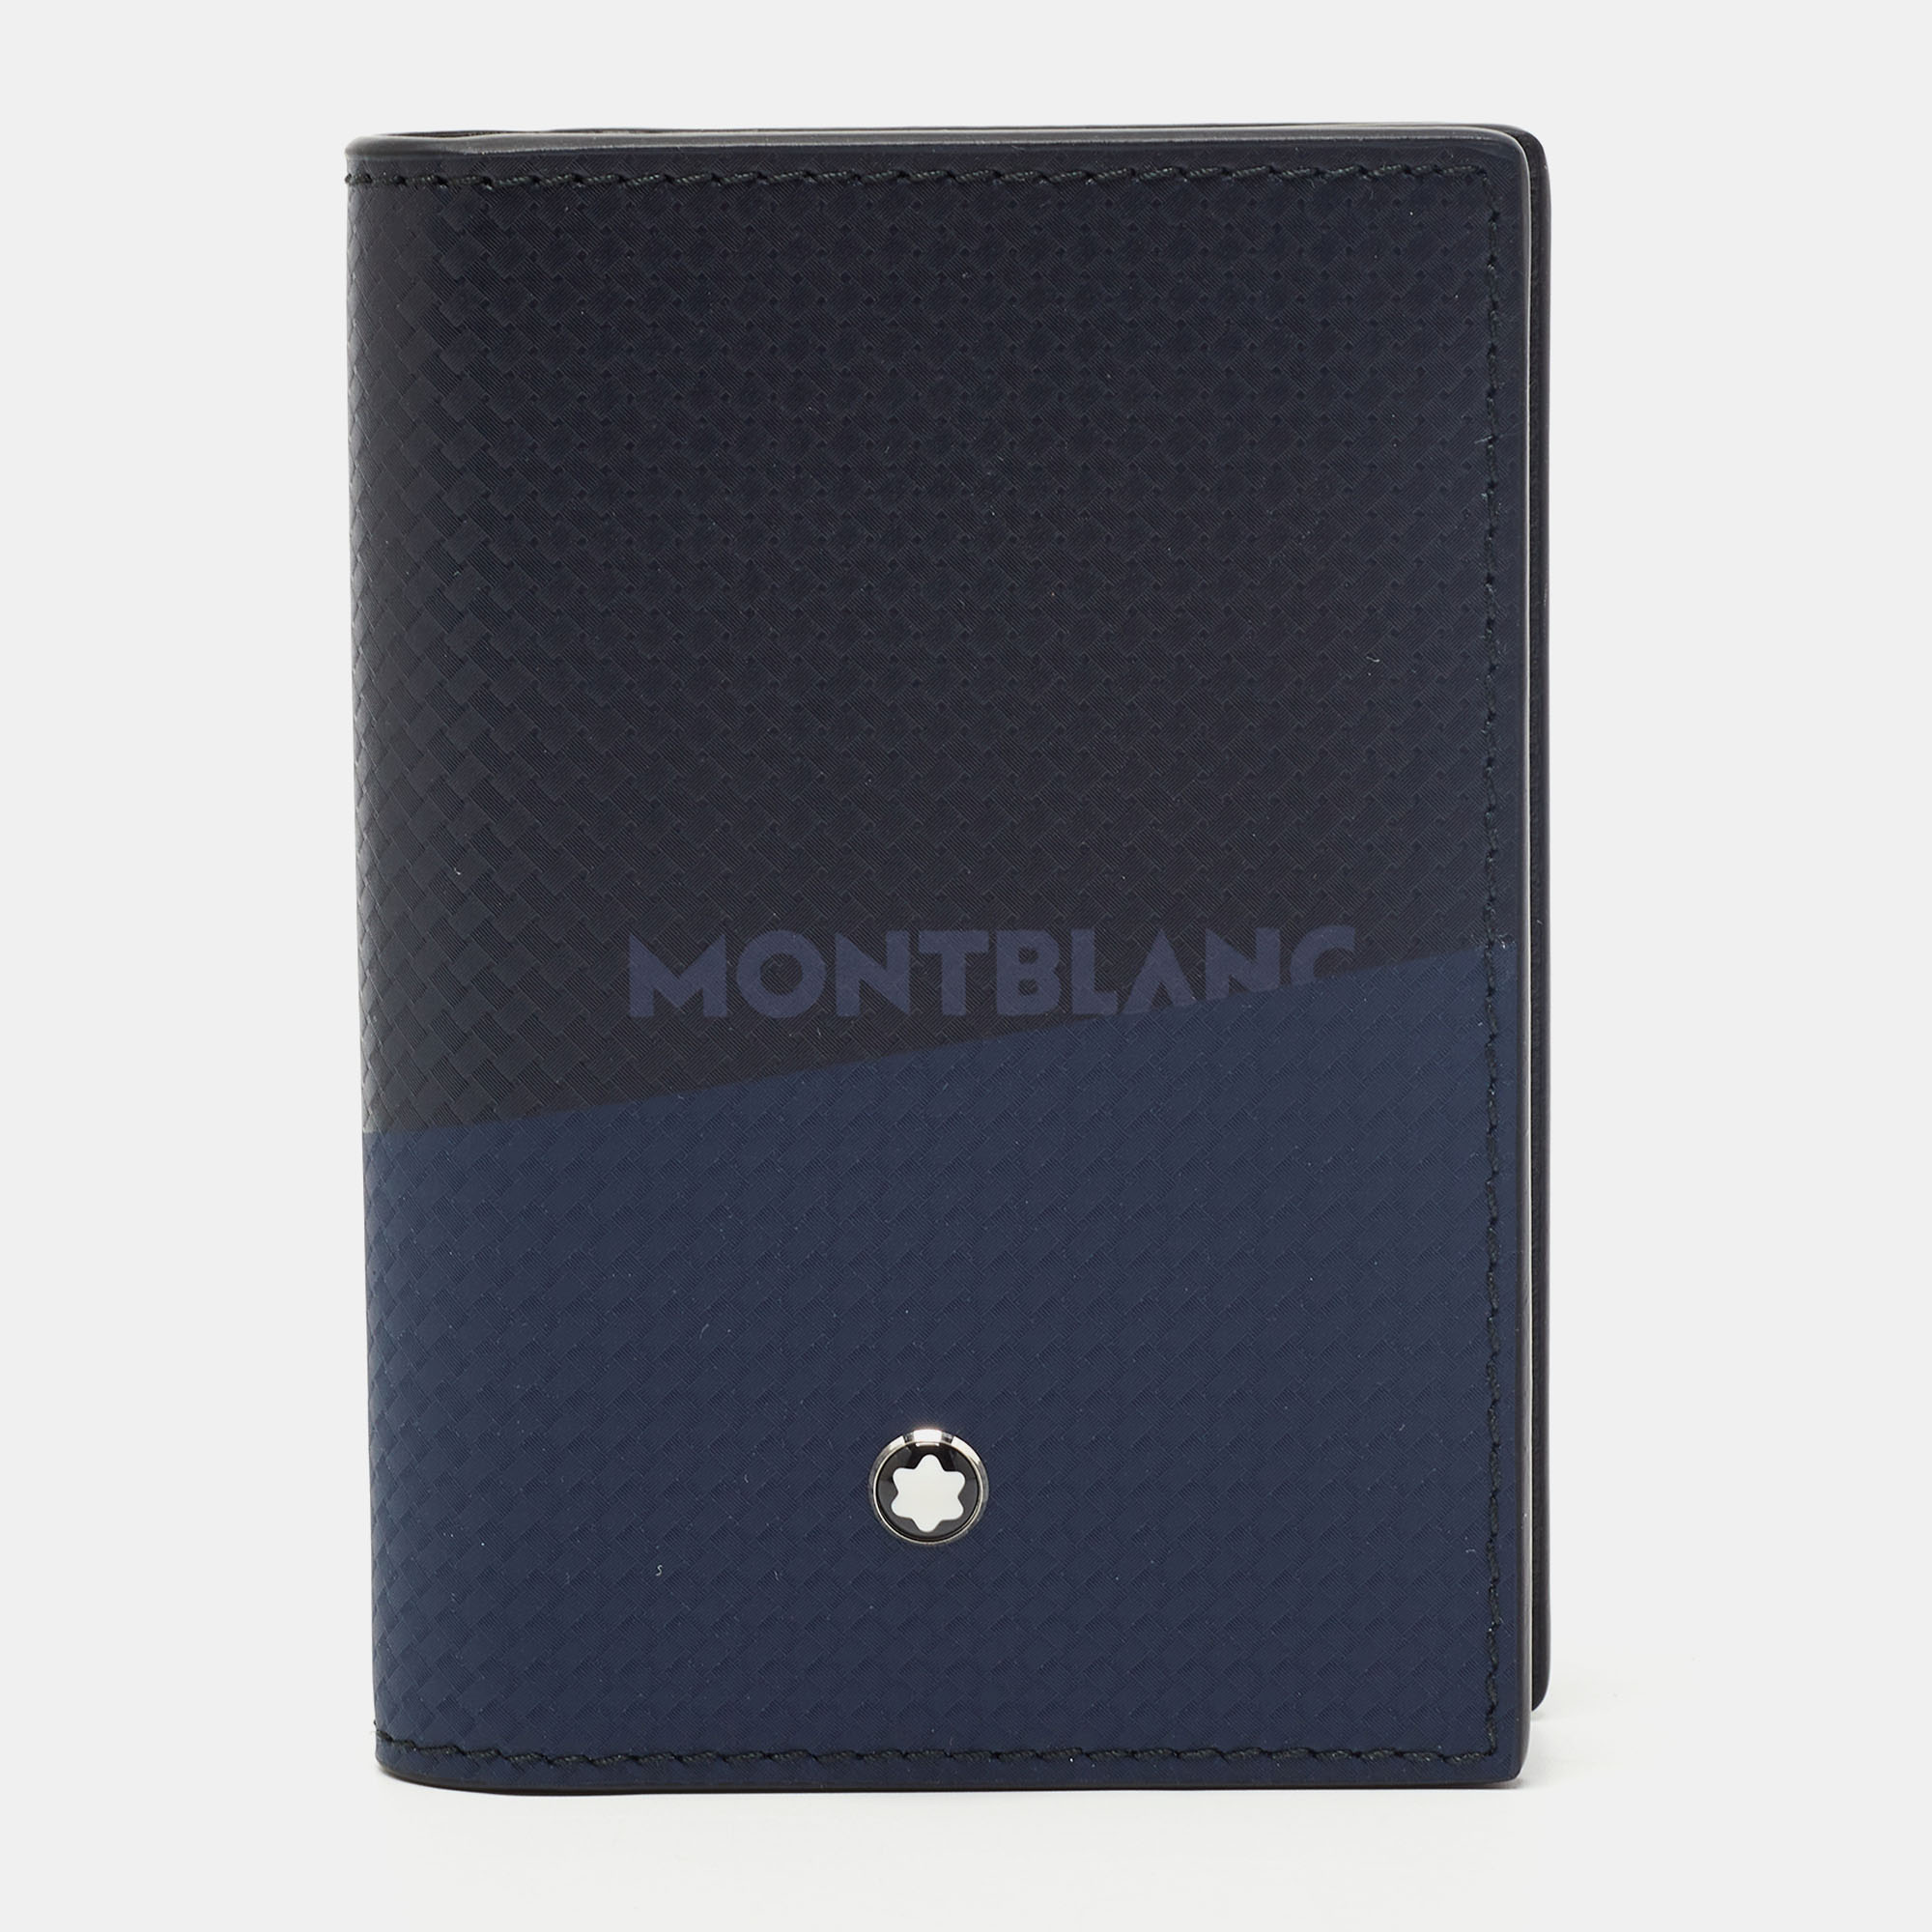 Pre-owned Montblanc Black/blue Leather Extreme 2.0 Business Card Holder